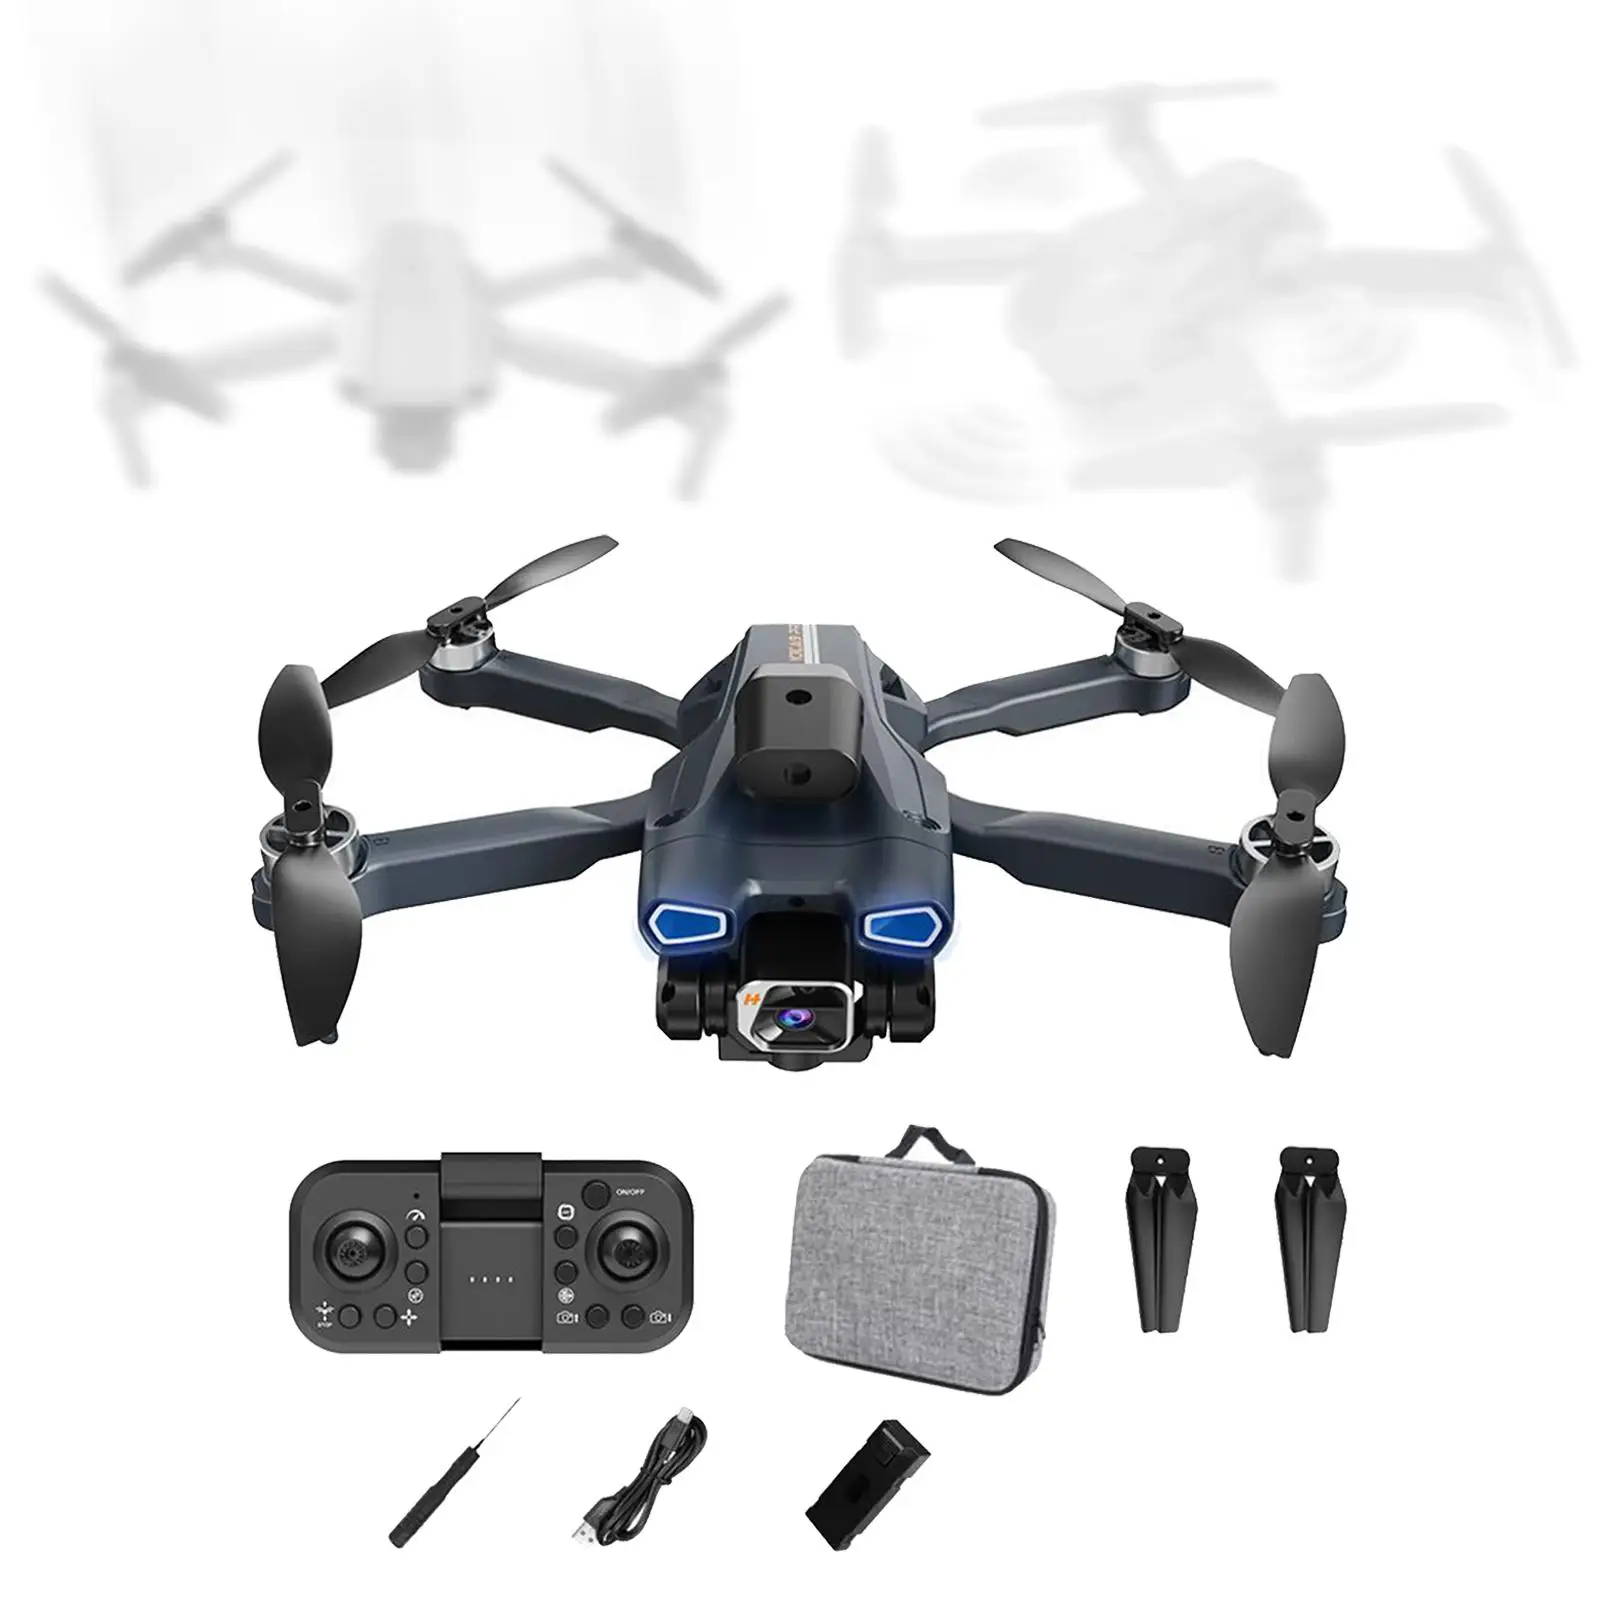 Pocket RC Aircraft Model 6 Channels 6 Axis Gyroscope 15 Flying Time Strong Brushless Motor Foldable Drone with 4K Camera